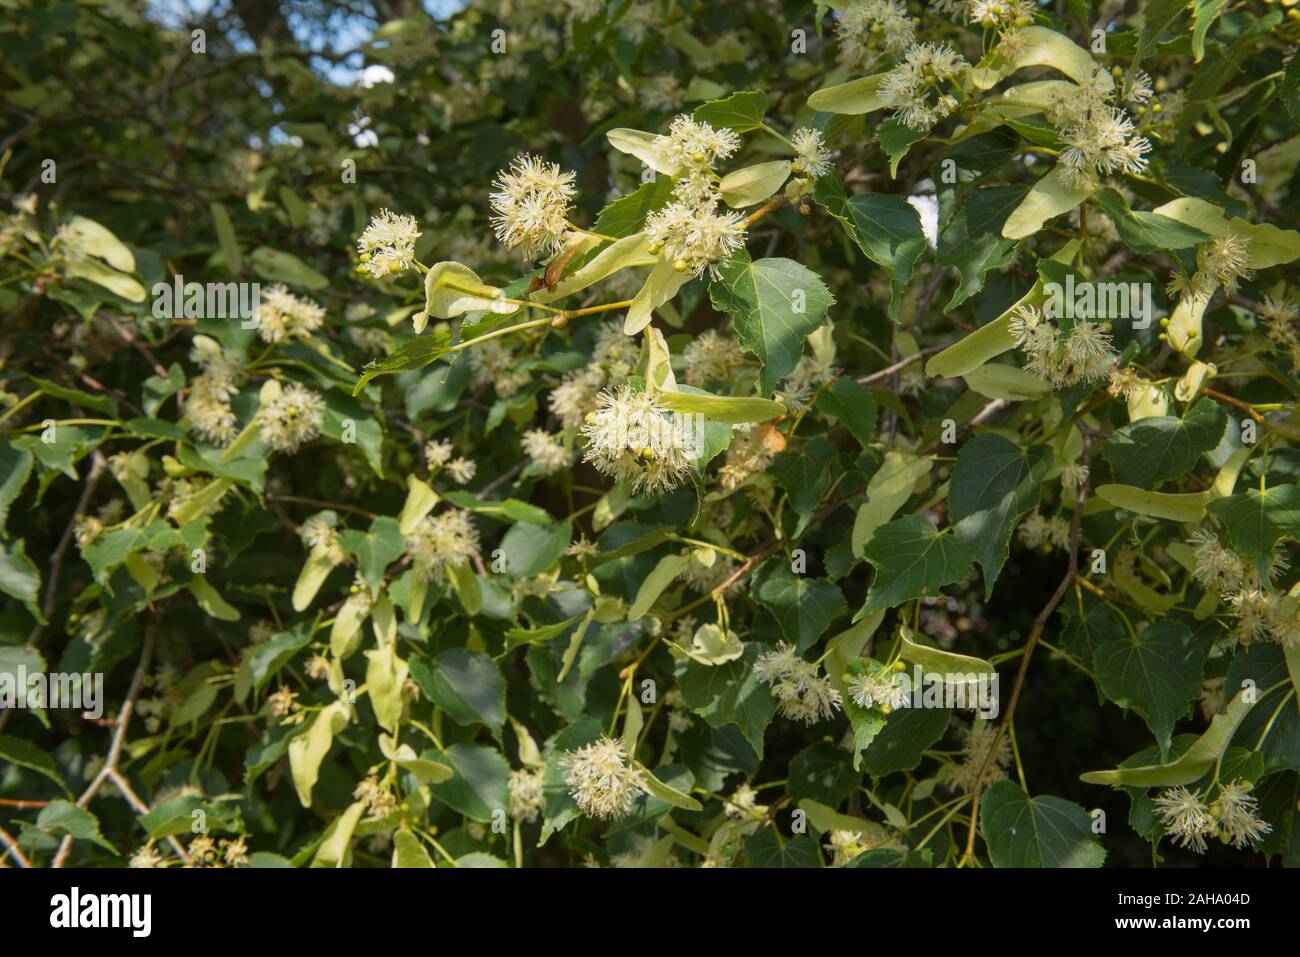 Summer Foliage and Flowers of a Common Linden or Common Lime Tree (Tilia x europaea) in a Park in Rural England, UK Stock Photo